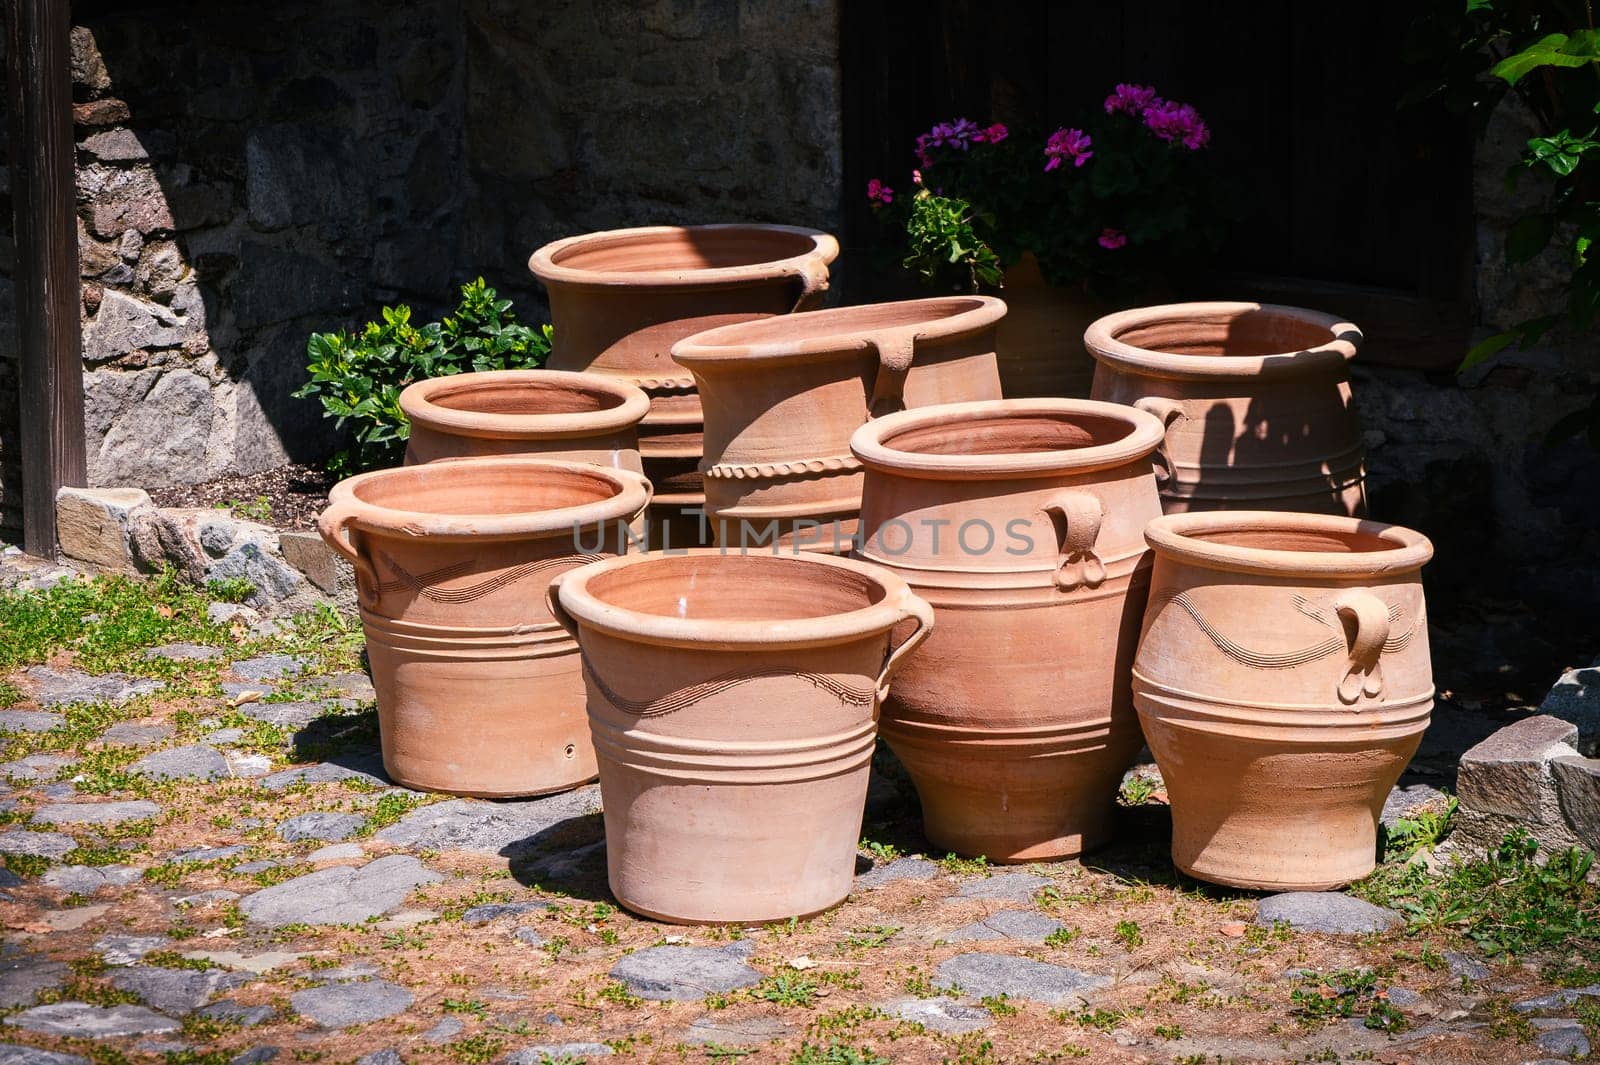 handmade clay jugs in Cyprus by Mixa74